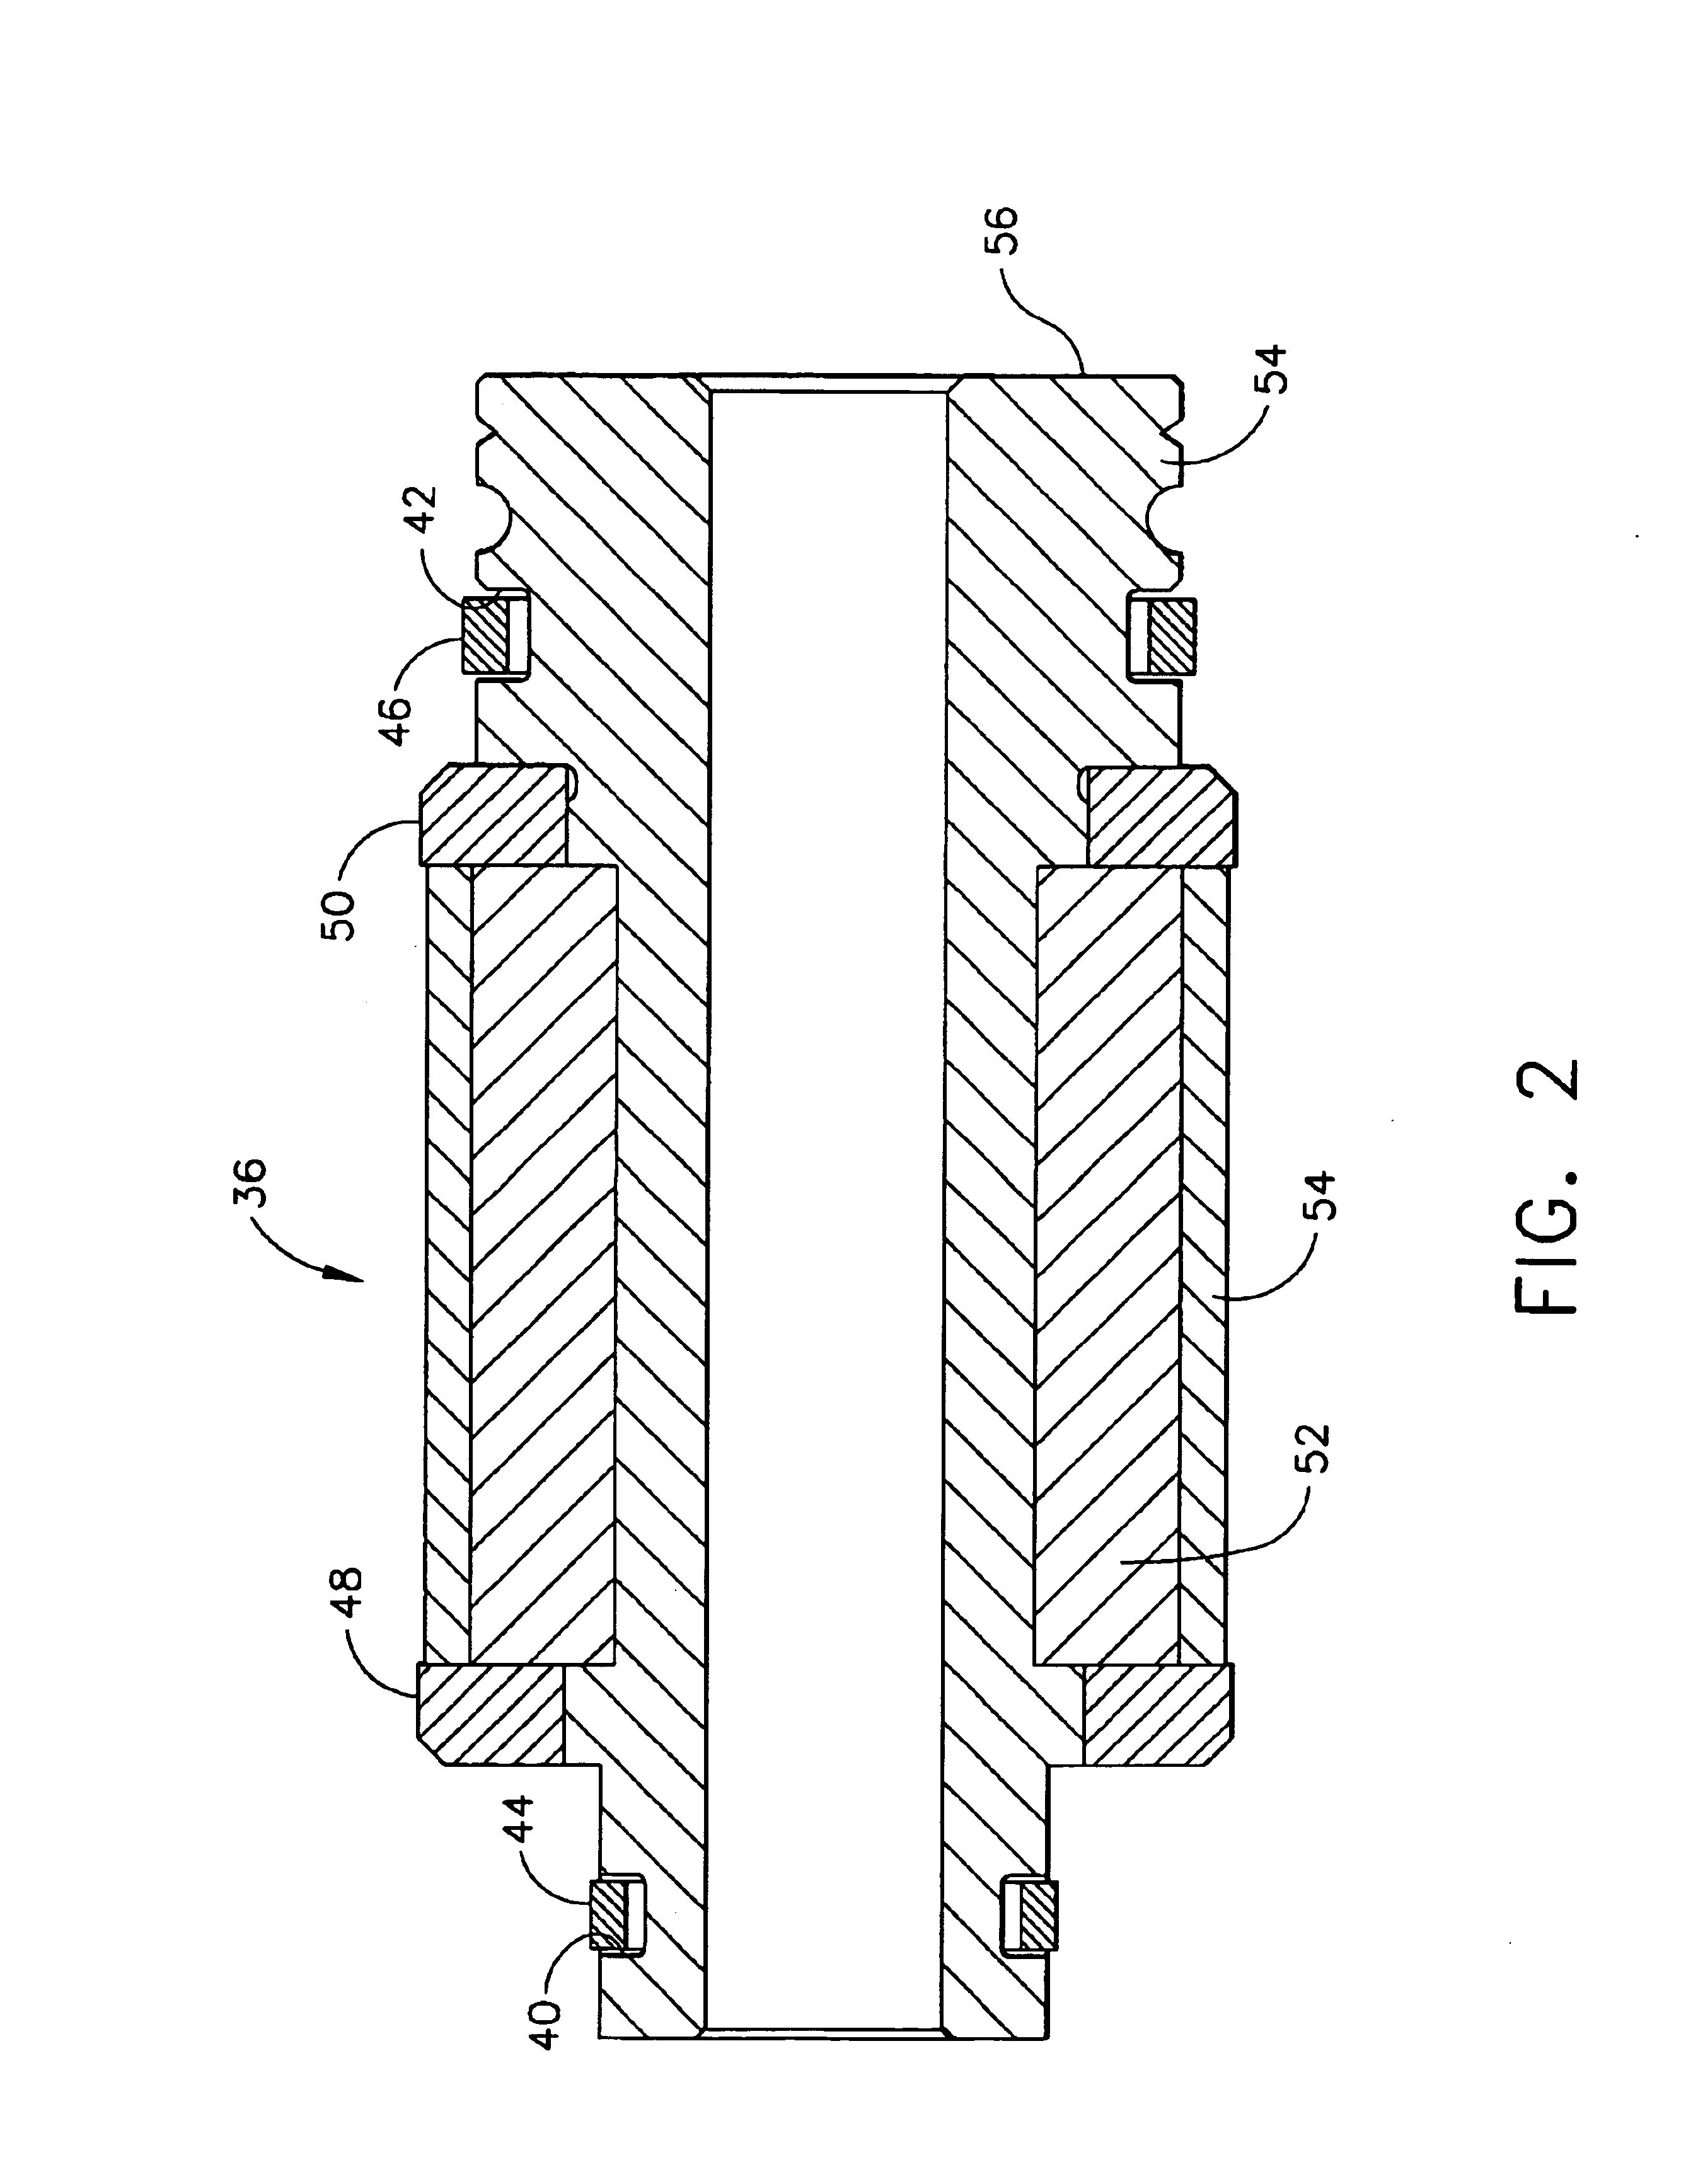 Center housing design for electric assisted turbocharger